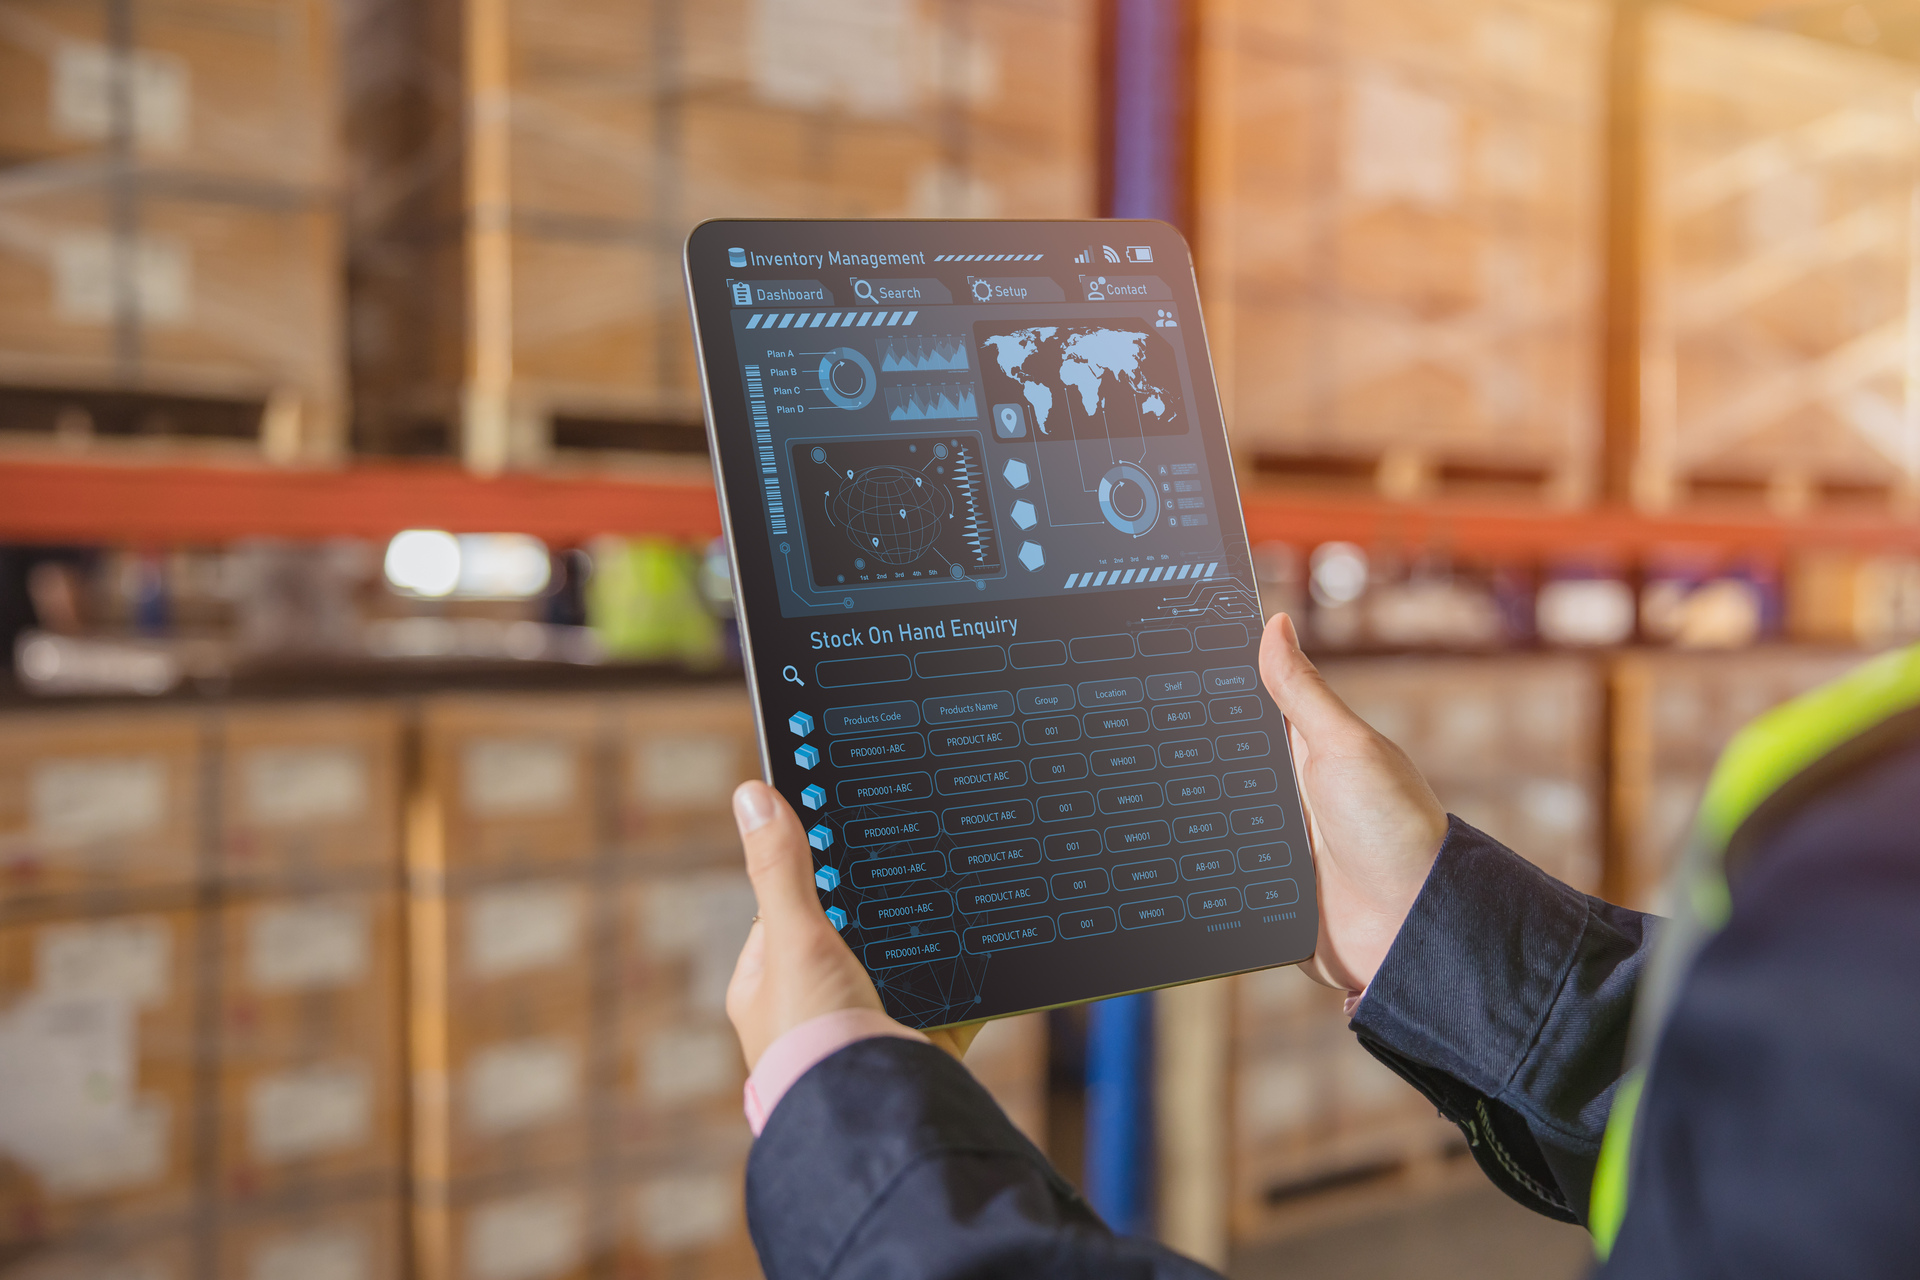 Warehouse and inventory intelligence systems